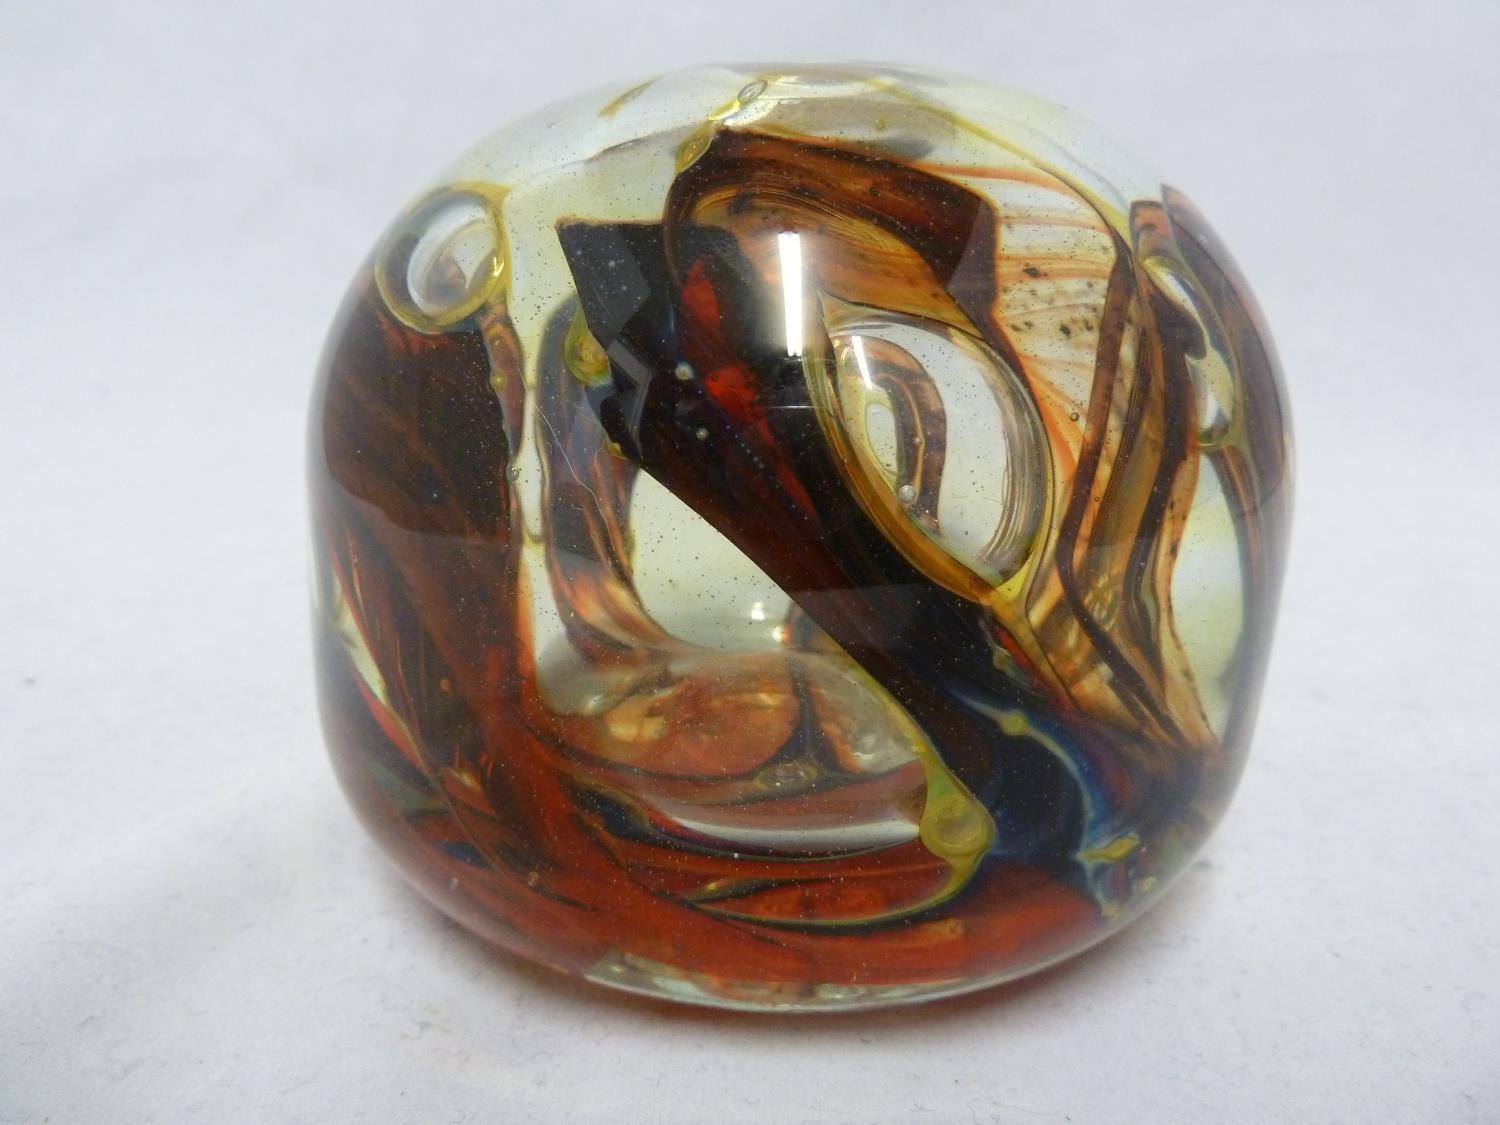 Isle of Wight Glass - an early treacle / tortoiseshell inside out vase, swirled in rich brown,